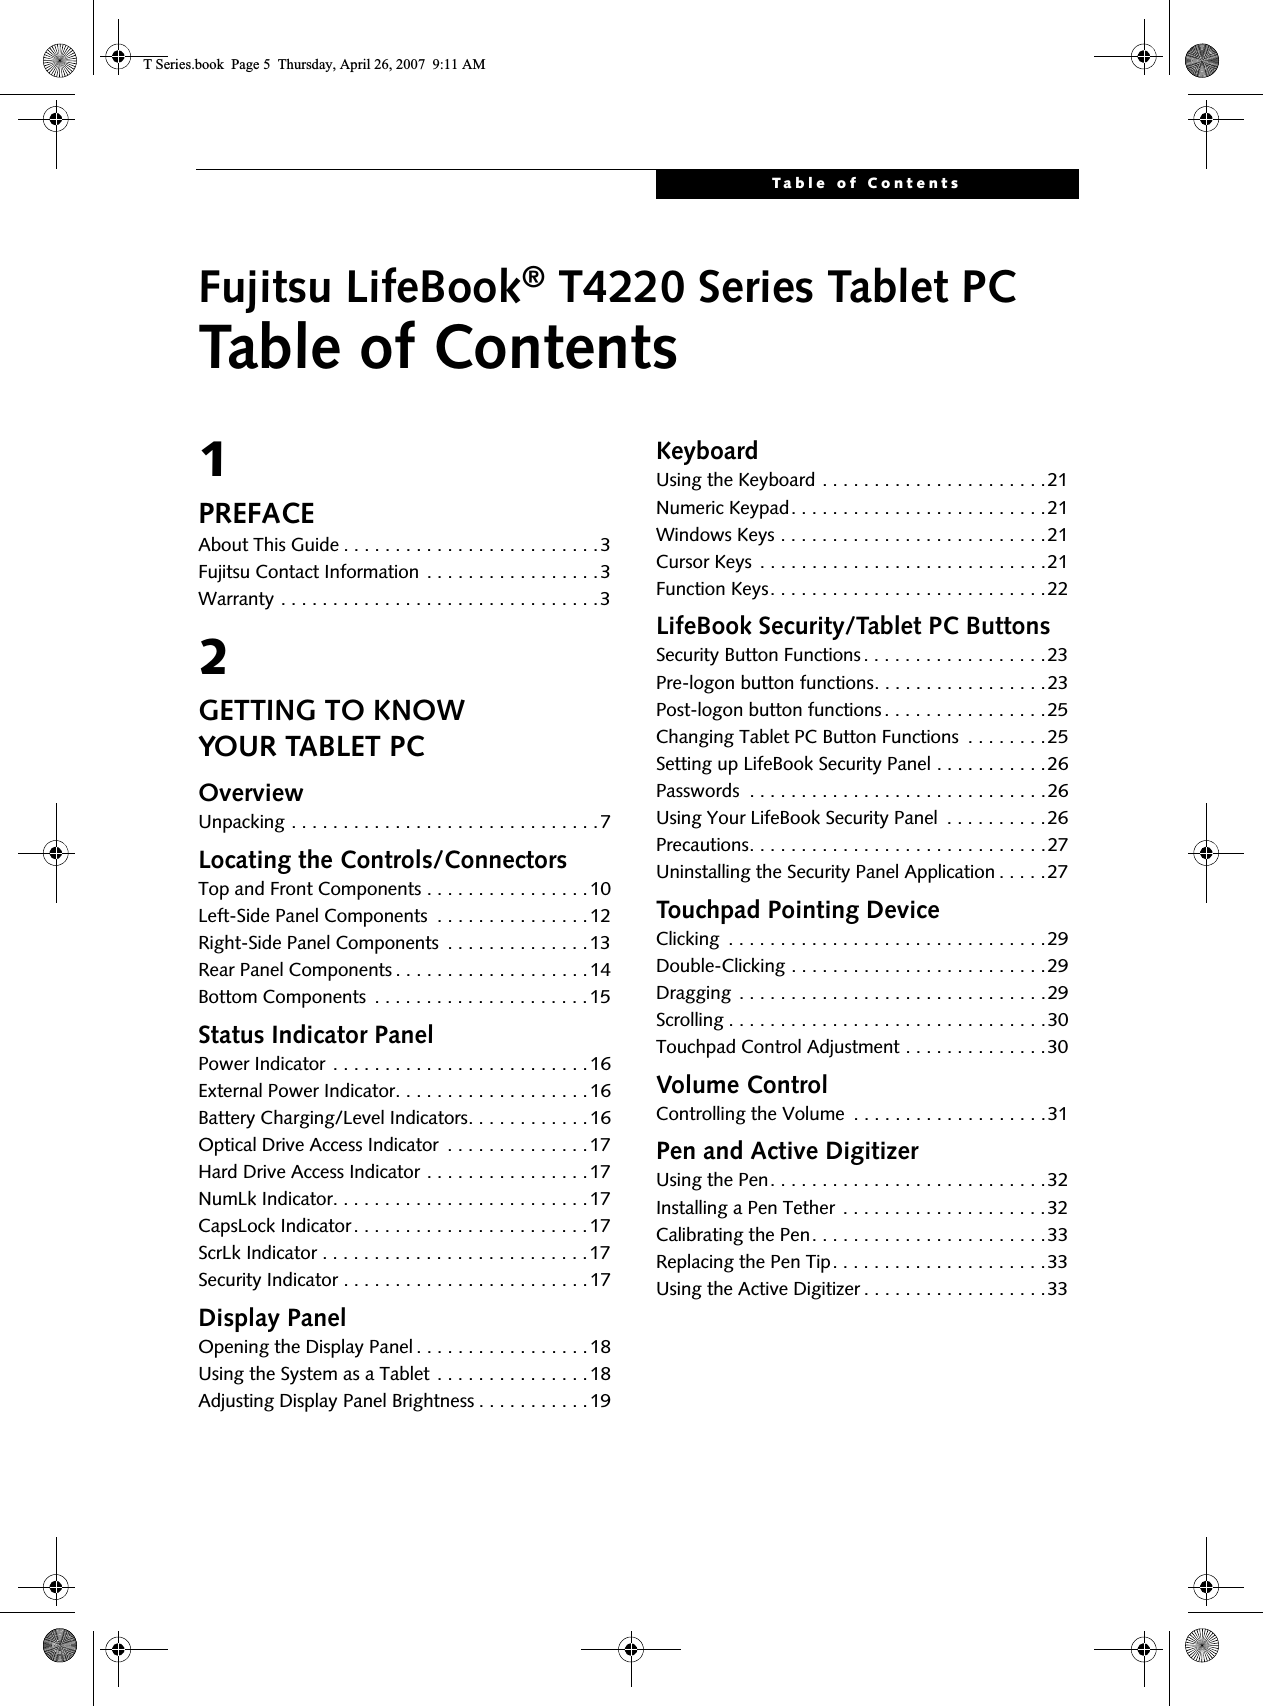 Table of ContentsFujitsu LifeBook® T4220 Series Tablet PCTable of Contents1PREFACEAbout This Guide . . . . . . . . . . . . . . . . . . . . . . . . .3Fujitsu Contact Information . . . . . . . . . . . . . . . . .3Warranty . . . . . . . . . . . . . . . . . . . . . . . . . . . . . . .32GETTING TO KNOWYOUR TABLET PCOverviewUnpacking . . . . . . . . . . . . . . . . . . . . . . . . . . . . . .7Locating the Controls/ConnectorsTop and Front Components . . . . . . . . . . . . . . . .10Left-Side Panel Components  . . . . . . . . . . . . . . .12Right-Side Panel Components  . . . . . . . . . . . . . .13Rear Panel Components . . . . . . . . . . . . . . . . . . .14Bottom Components  . . . . . . . . . . . . . . . . . . . . .15Status Indicator PanelPower Indicator . . . . . . . . . . . . . . . . . . . . . . . . .16External Power Indicator. . . . . . . . . . . . . . . . . . .16Battery Charging/Level Indicators. . . . . . . . . . . .16Optical Drive Access Indicator  . . . . . . . . . . . . . .17Hard Drive Access Indicator . . . . . . . . . . . . . . . .17NumLk Indicator. . . . . . . . . . . . . . . . . . . . . . . . .17CapsLock Indicator. . . . . . . . . . . . . . . . . . . . . . .17ScrLk Indicator . . . . . . . . . . . . . . . . . . . . . . . . . .17Security Indicator . . . . . . . . . . . . . . . . . . . . . . . .17Display PanelOpening the Display Panel . . . . . . . . . . . . . . . . .18Using the System as a Tablet . . . . . . . . . . . . . . .18Adjusting Display Panel Brightness . . . . . . . . . . .19KeyboardUsing the Keyboard . . . . . . . . . . . . . . . . . . . . . .21Numeric Keypad. . . . . . . . . . . . . . . . . . . . . . . . .21Windows Keys . . . . . . . . . . . . . . . . . . . . . . . . . .21Cursor Keys  . . . . . . . . . . . . . . . . . . . . . . . . . . . .21Function Keys. . . . . . . . . . . . . . . . . . . . . . . . . . .22LifeBook Security/Tablet PC ButtonsSecurity Button Functions . . . . . . . . . . . . . . . . . .23Pre-logon button functions. . . . . . . . . . . . . . . . .23Post-logon button functions . . . . . . . . . . . . . . . .25Changing Tablet PC Button Functions  . . . . . . . .25Setting up LifeBook Security Panel . . . . . . . . . . .26Passwords  . . . . . . . . . . . . . . . . . . . . . . . . . . . . .26Using Your LifeBook Security Panel  . . . . . . . . . .26Precautions. . . . . . . . . . . . . . . . . . . . . . . . . . . . .27Uninstalling the Security Panel Application . . . . .27Touchpad Pointing DeviceClicking  . . . . . . . . . . . . . . . . . . . . . . . . . . . . . . .29Double-Clicking . . . . . . . . . . . . . . . . . . . . . . . . .29Dragging  . . . . . . . . . . . . . . . . . . . . . . . . . . . . . .29Scrolling . . . . . . . . . . . . . . . . . . . . . . . . . . . . . . .30Touchpad Control Adjustment . . . . . . . . . . . . . .30Volume ControlControlling the Volume  . . . . . . . . . . . . . . . . . . .31Pen and Active DigitizerUsing the Pen. . . . . . . . . . . . . . . . . . . . . . . . . . .32Installing a Pen Tether  . . . . . . . . . . . . . . . . . . . .32Calibrating the Pen. . . . . . . . . . . . . . . . . . . . . . .33Replacing the Pen Tip. . . . . . . . . . . . . . . . . . . . .33Using the Active Digitizer . . . . . . . . . . . . . . . . . .33T Series.book  Page 5  Thursday, April 26, 2007  9:11 AM